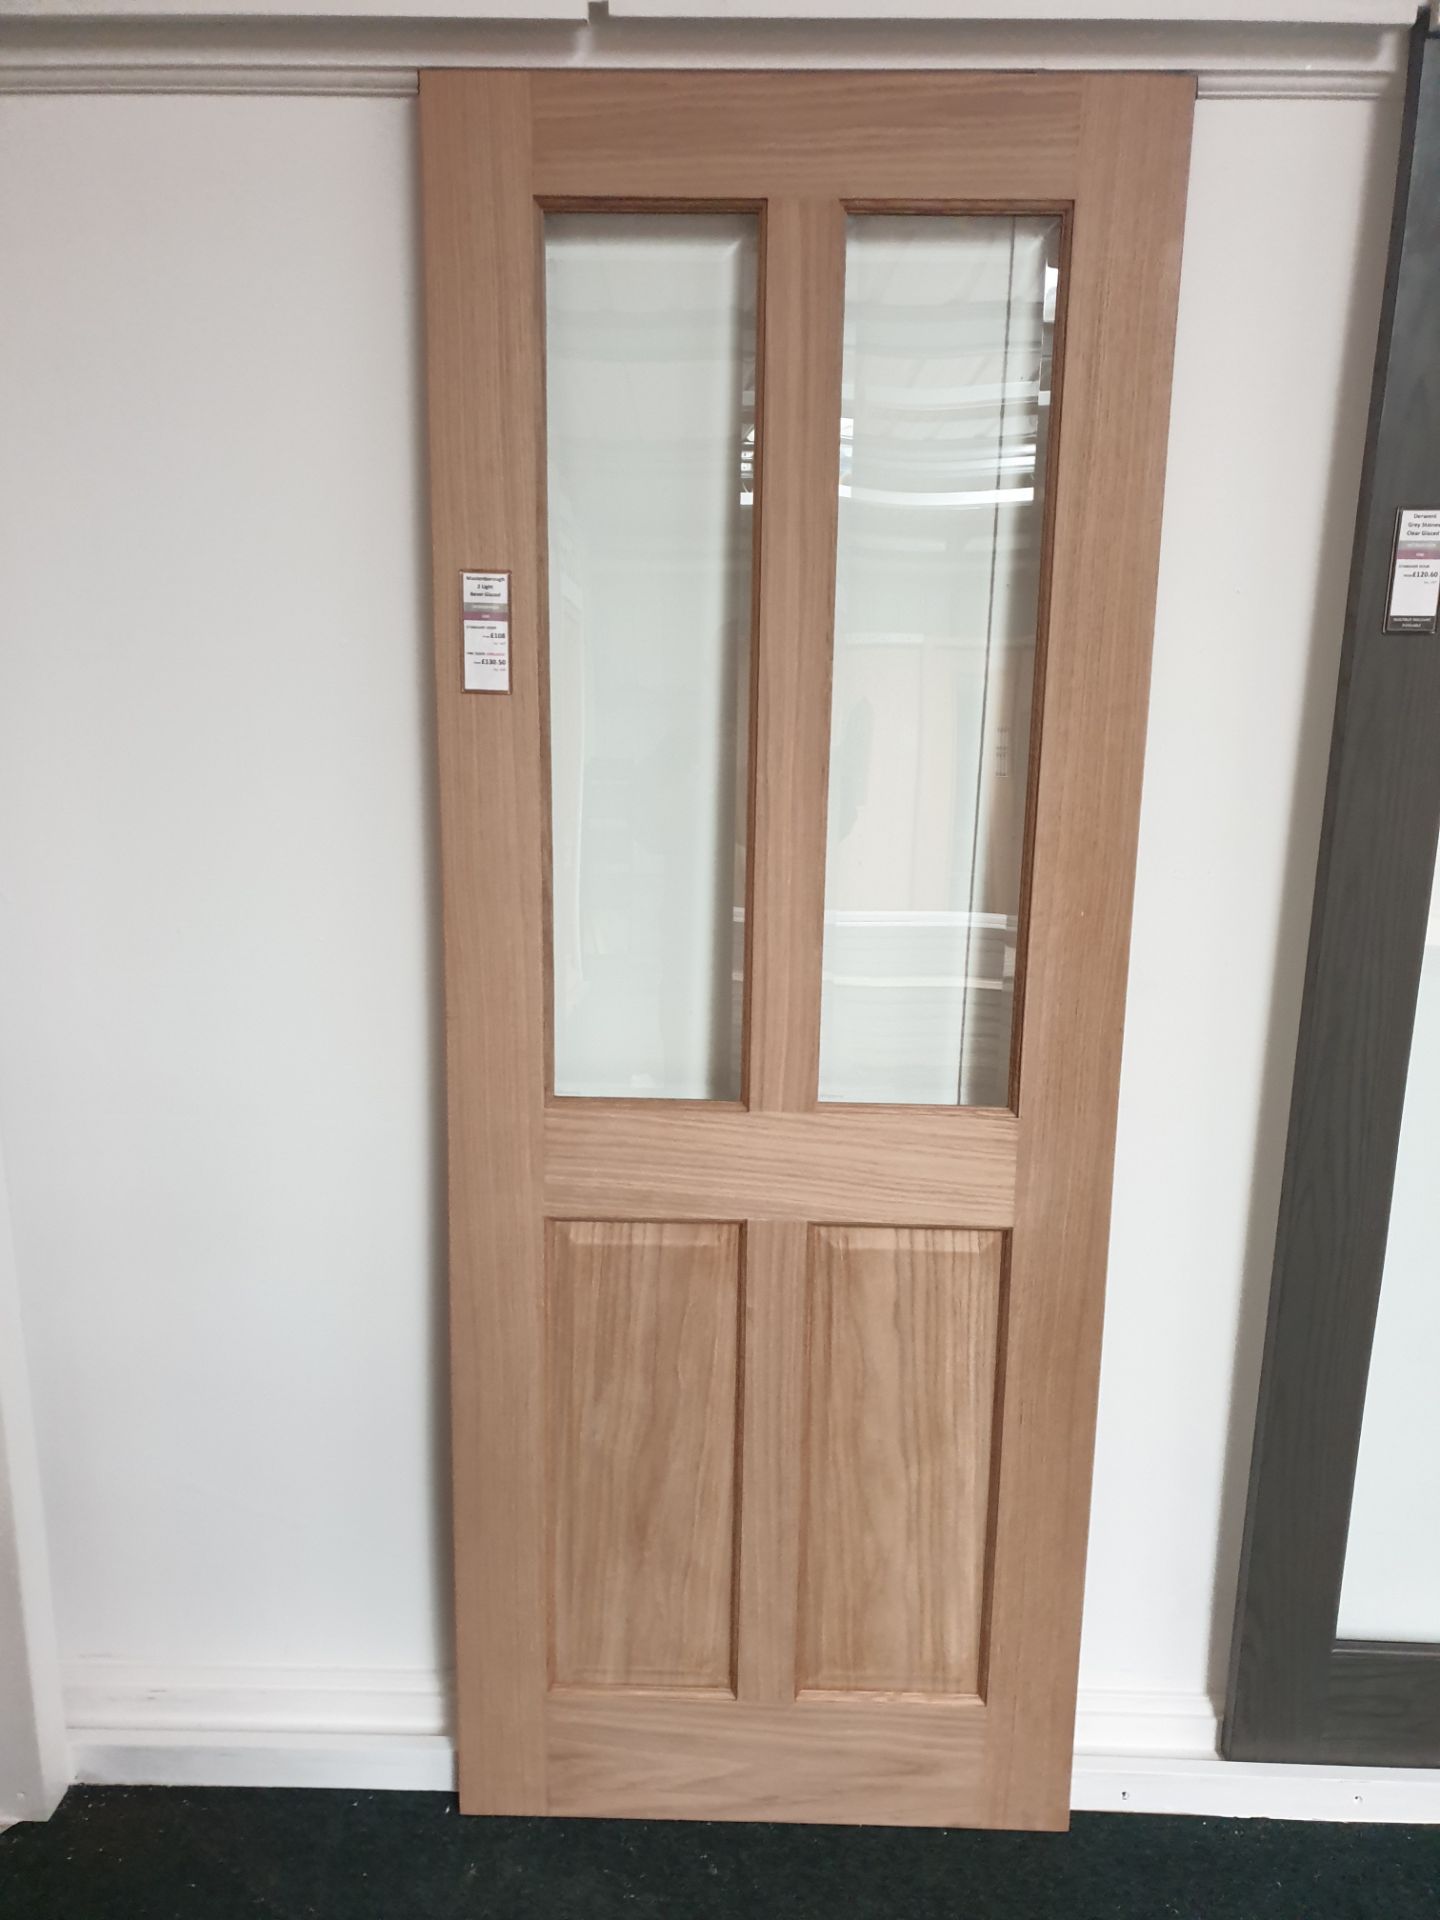 2 x Maidenborough 2 Lite Unglazed Fire Door AWOMAI27FD 1981x686x44mm - Lots to be handed out in